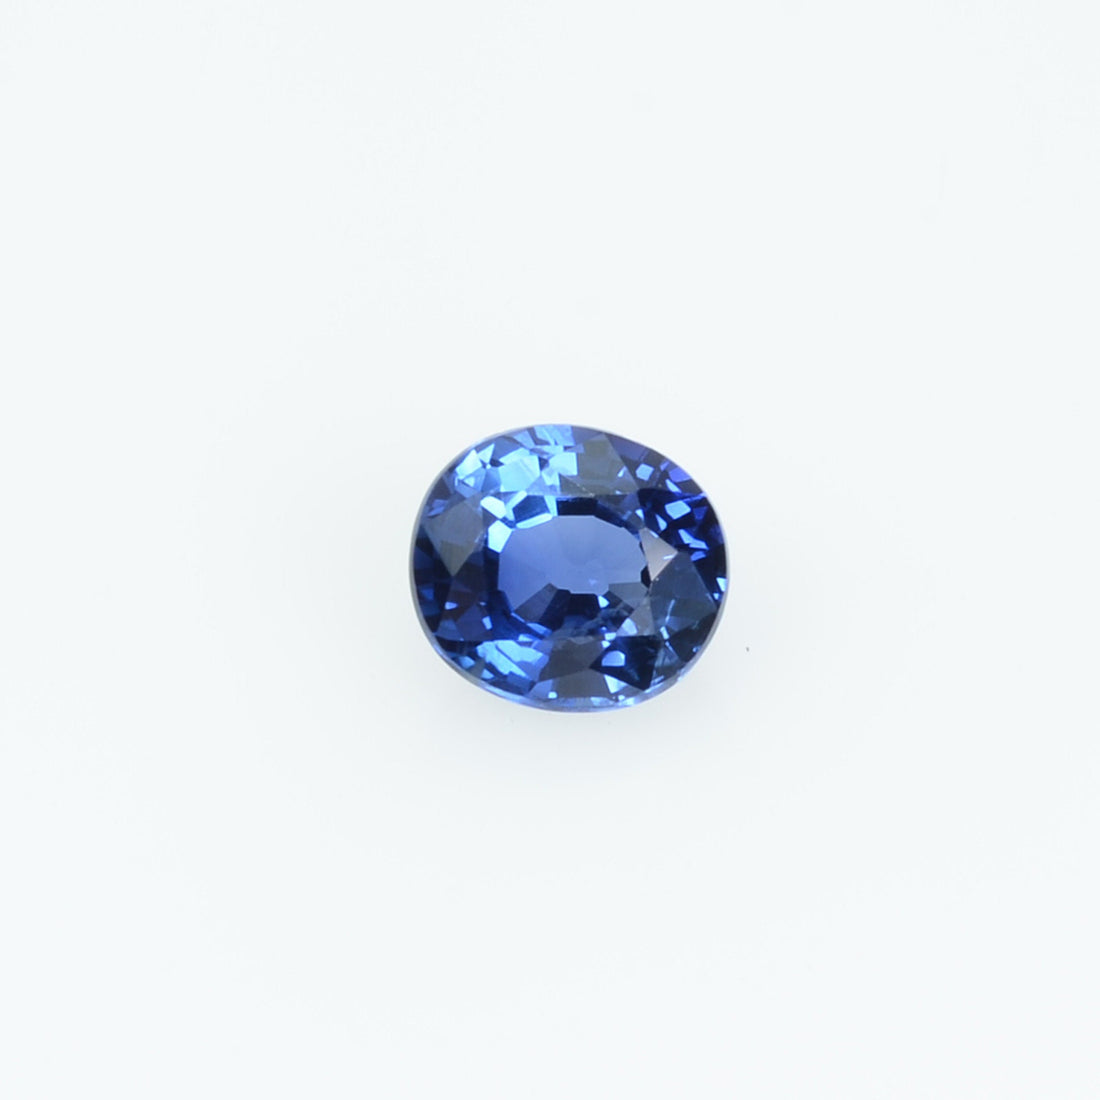 0.40 Cts Natural Blue Sapphire Loose Gemstone Oval Cut